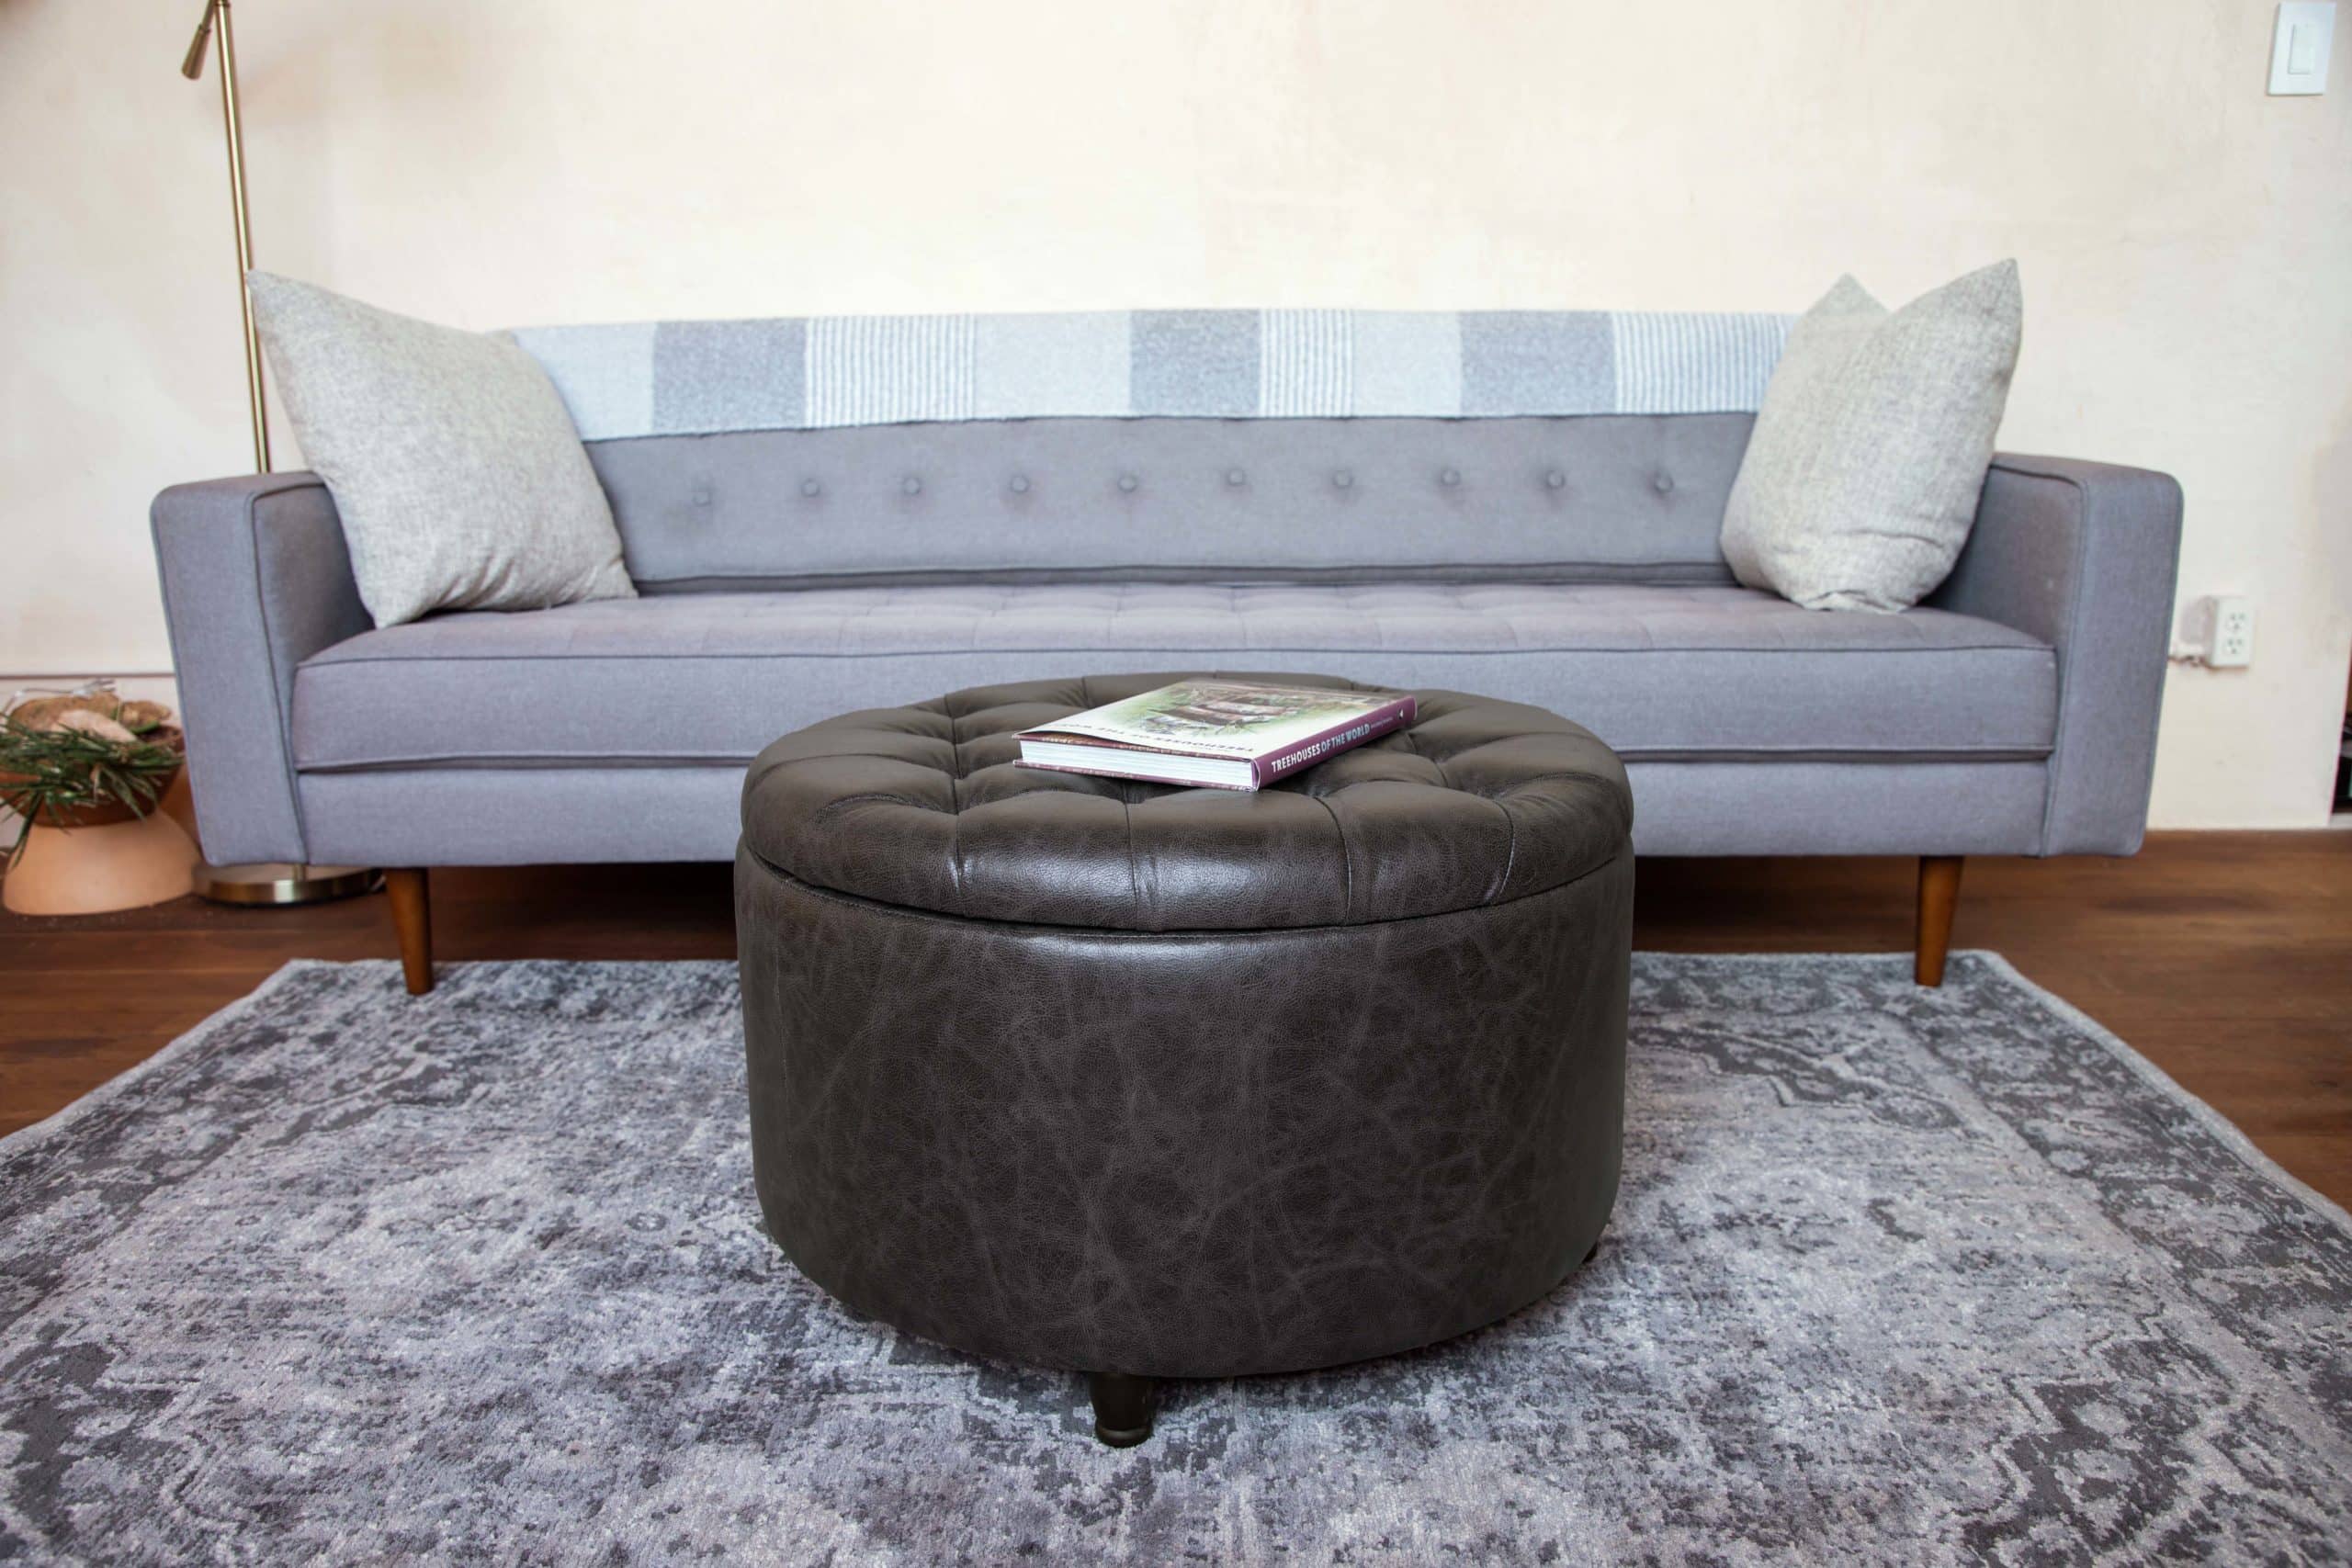 A Wovenbyrd Large Round Pintucked Storage Ottoman with Lift Off Lid sits in front of a couch in a living room, providing a foot rest and additional storage space.